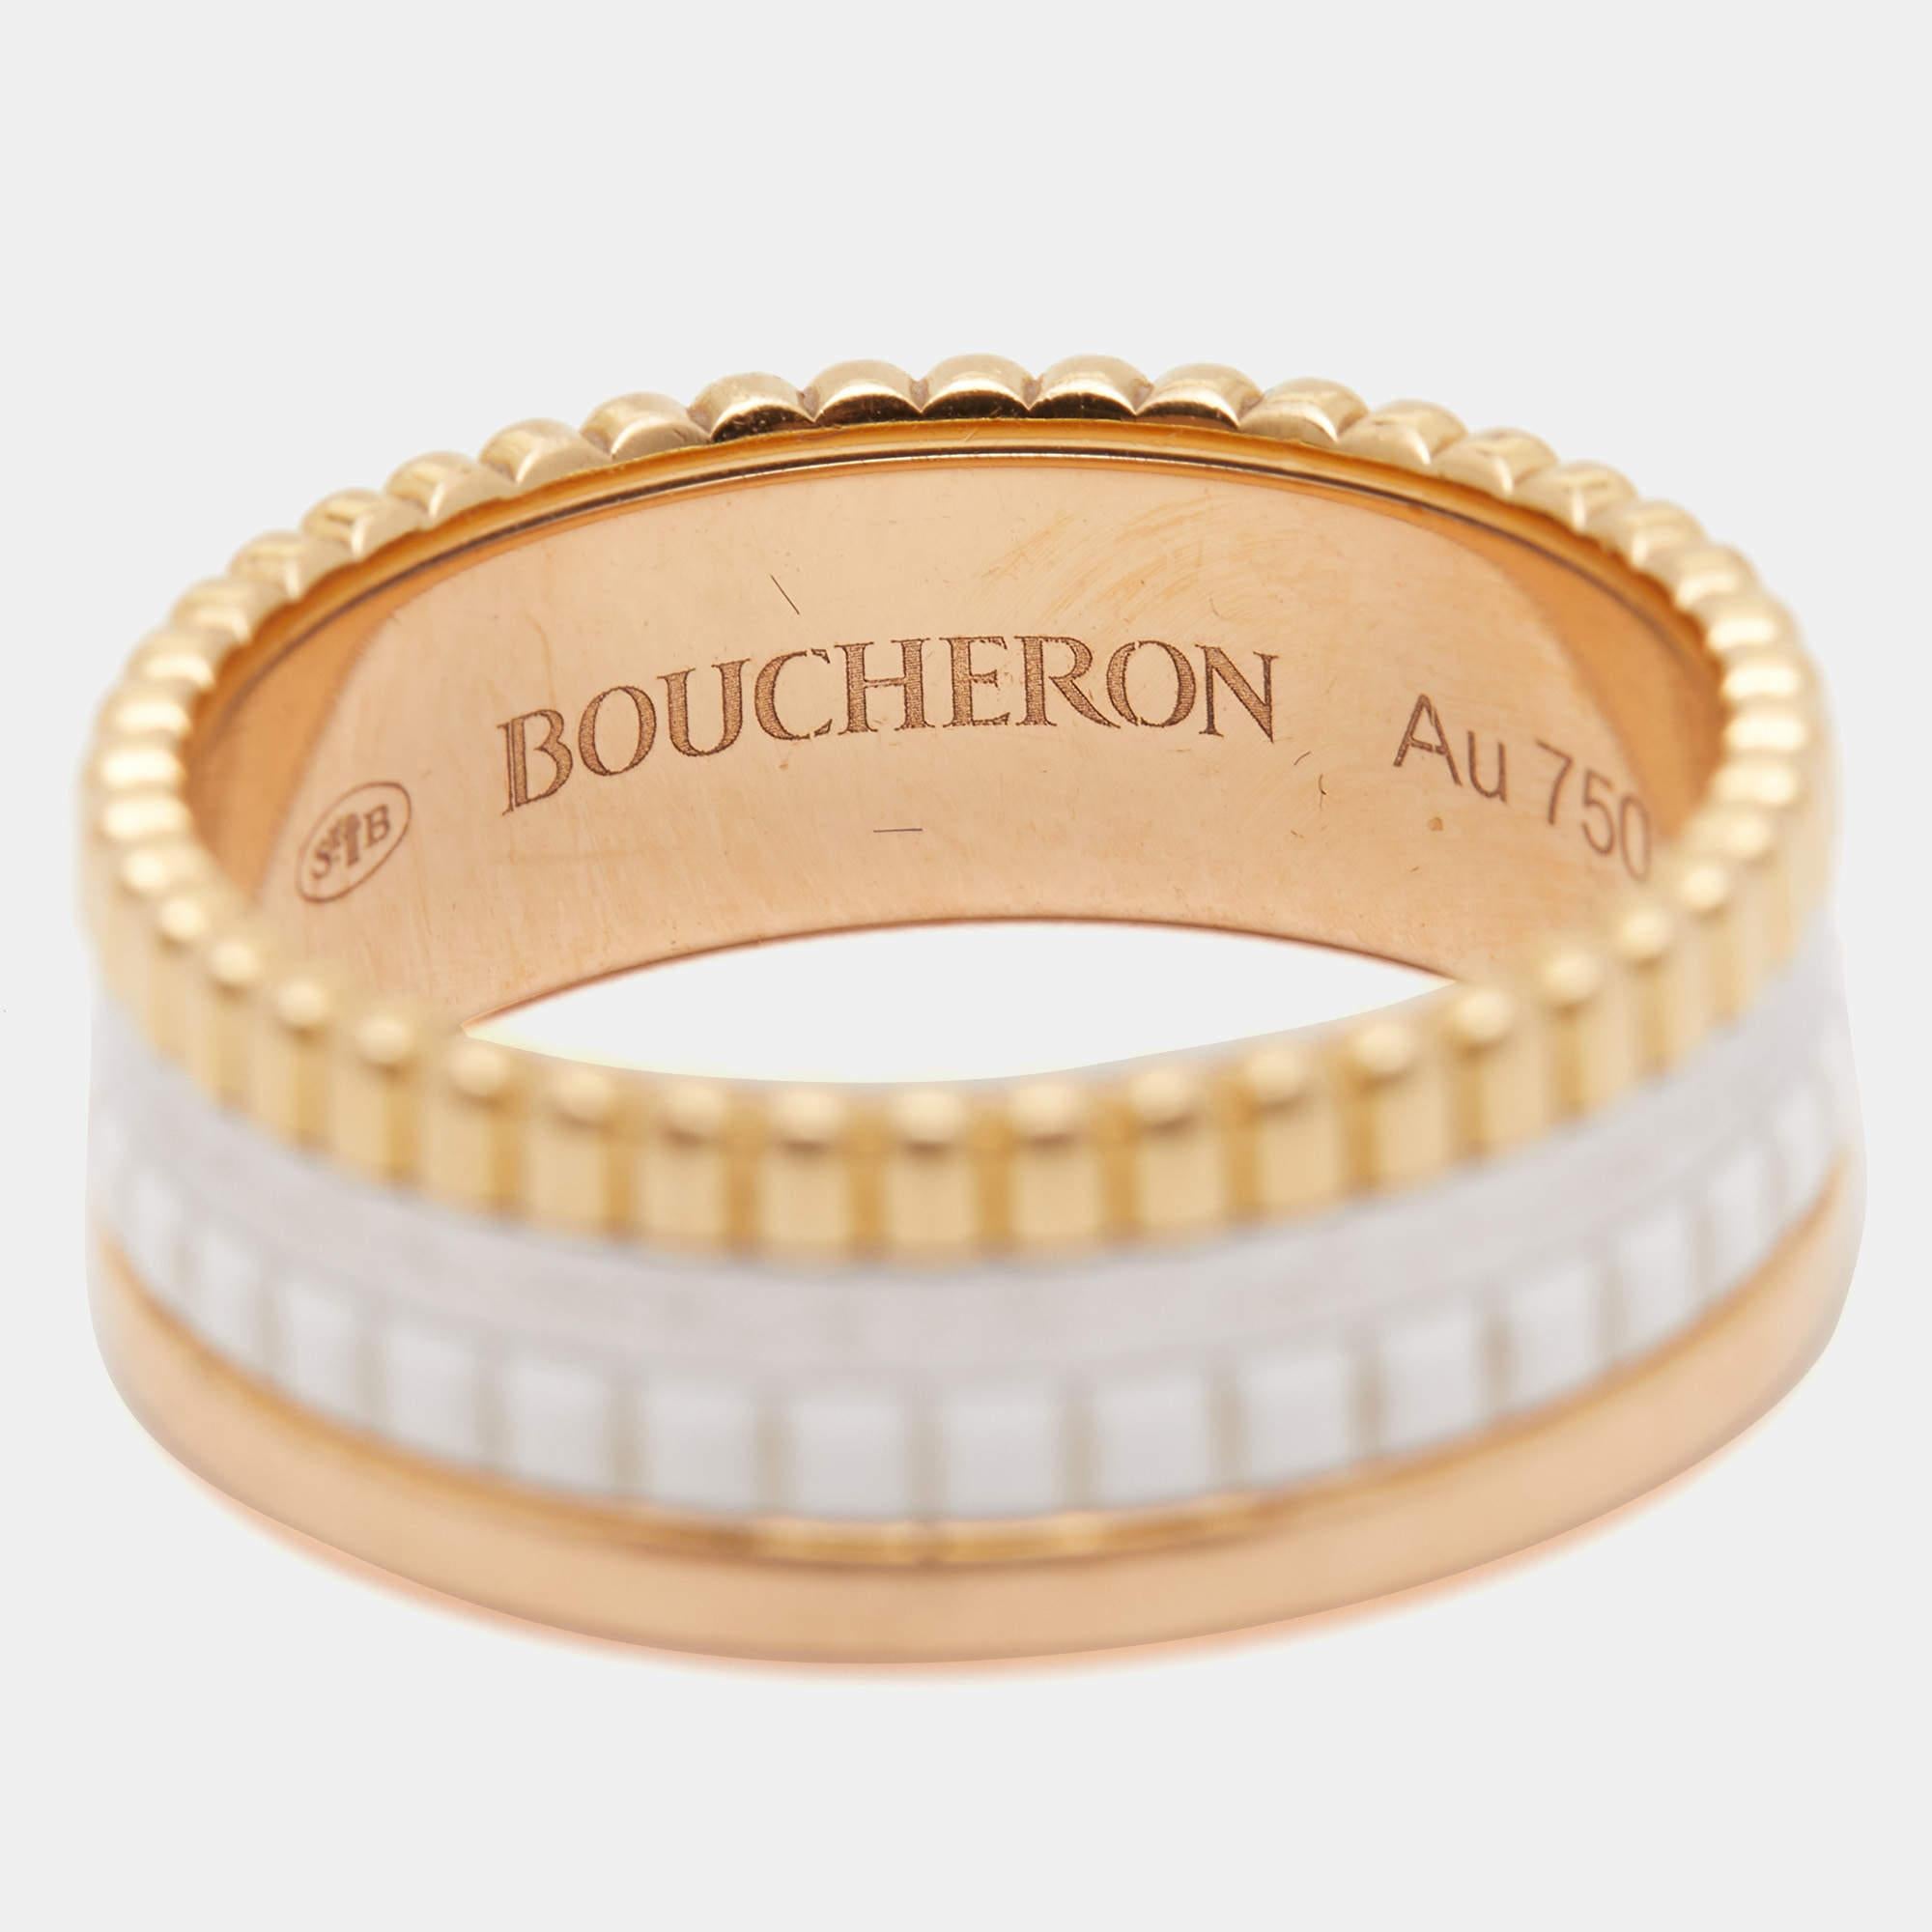 Boucheron's Quatre collection beautifully presents the spirit of the brand, exemplifying craftsmanship and an intricate play of textures and gold. The Quatre Classique collection gifts you this ring arranged preciously in 18k three-tone gold and